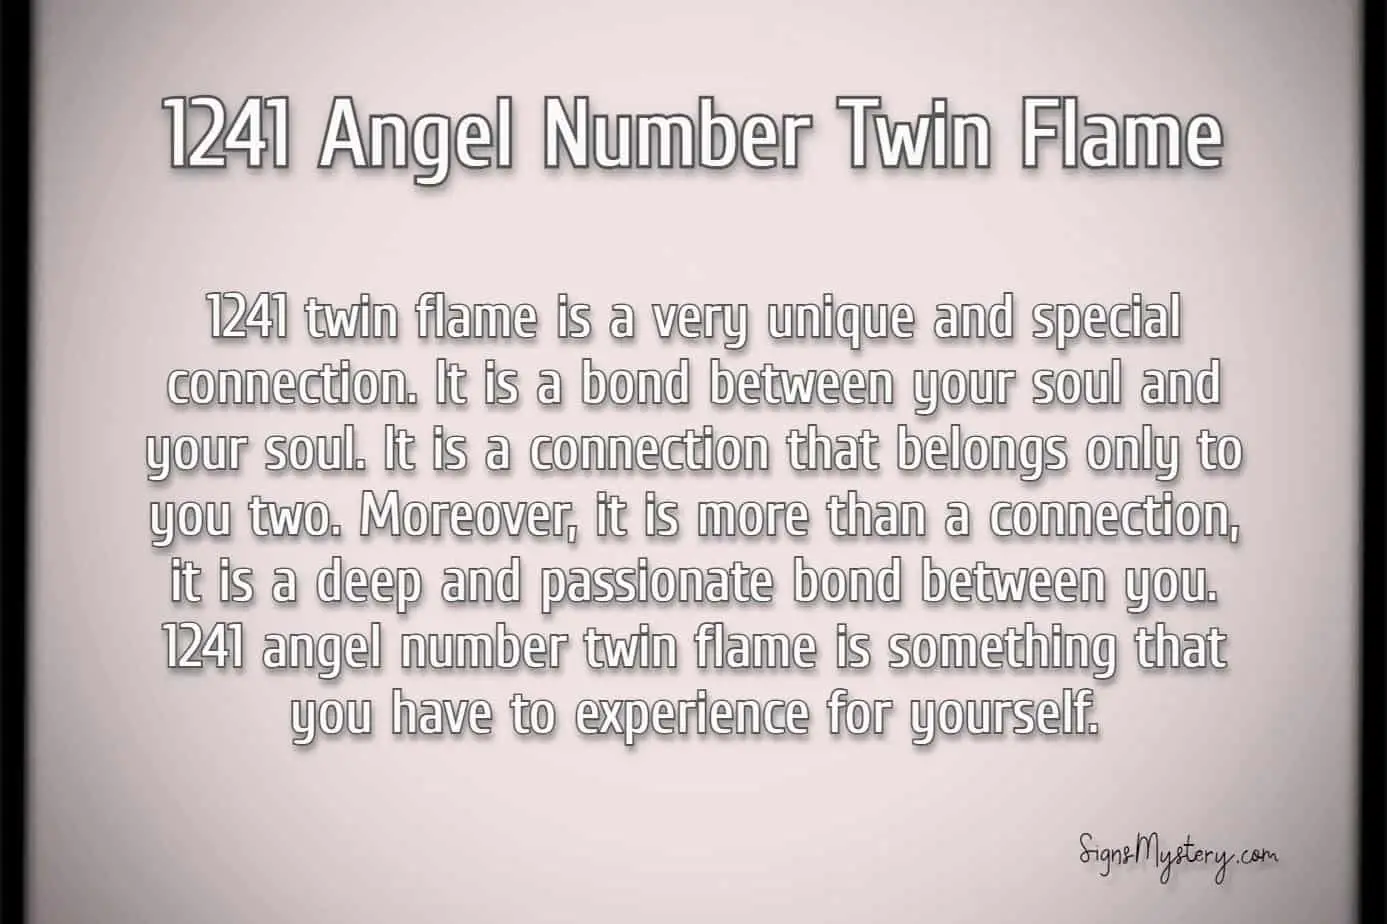 1241 angel number twin flame